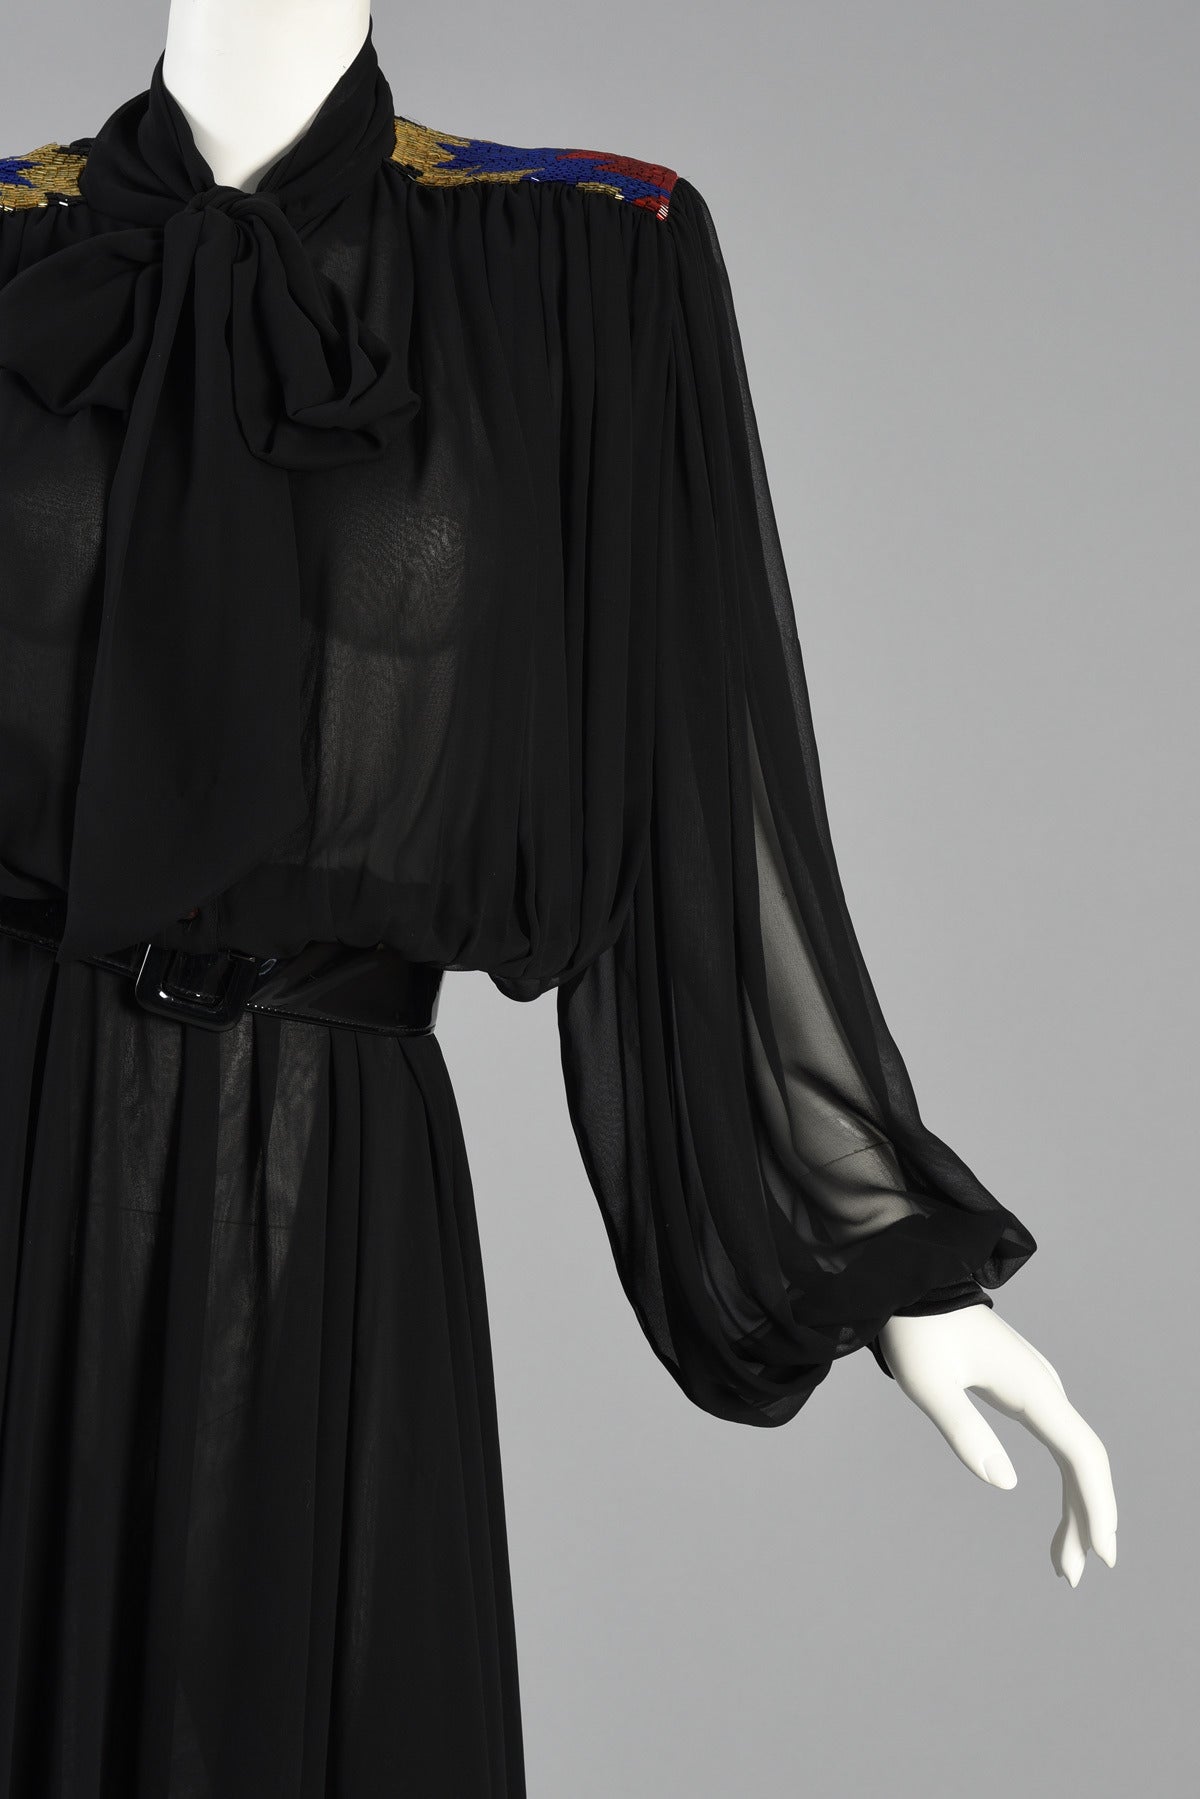 Stunning Wayne Clark Silk Dress with Beaded Details and Blouson Sleeves For Sale 2